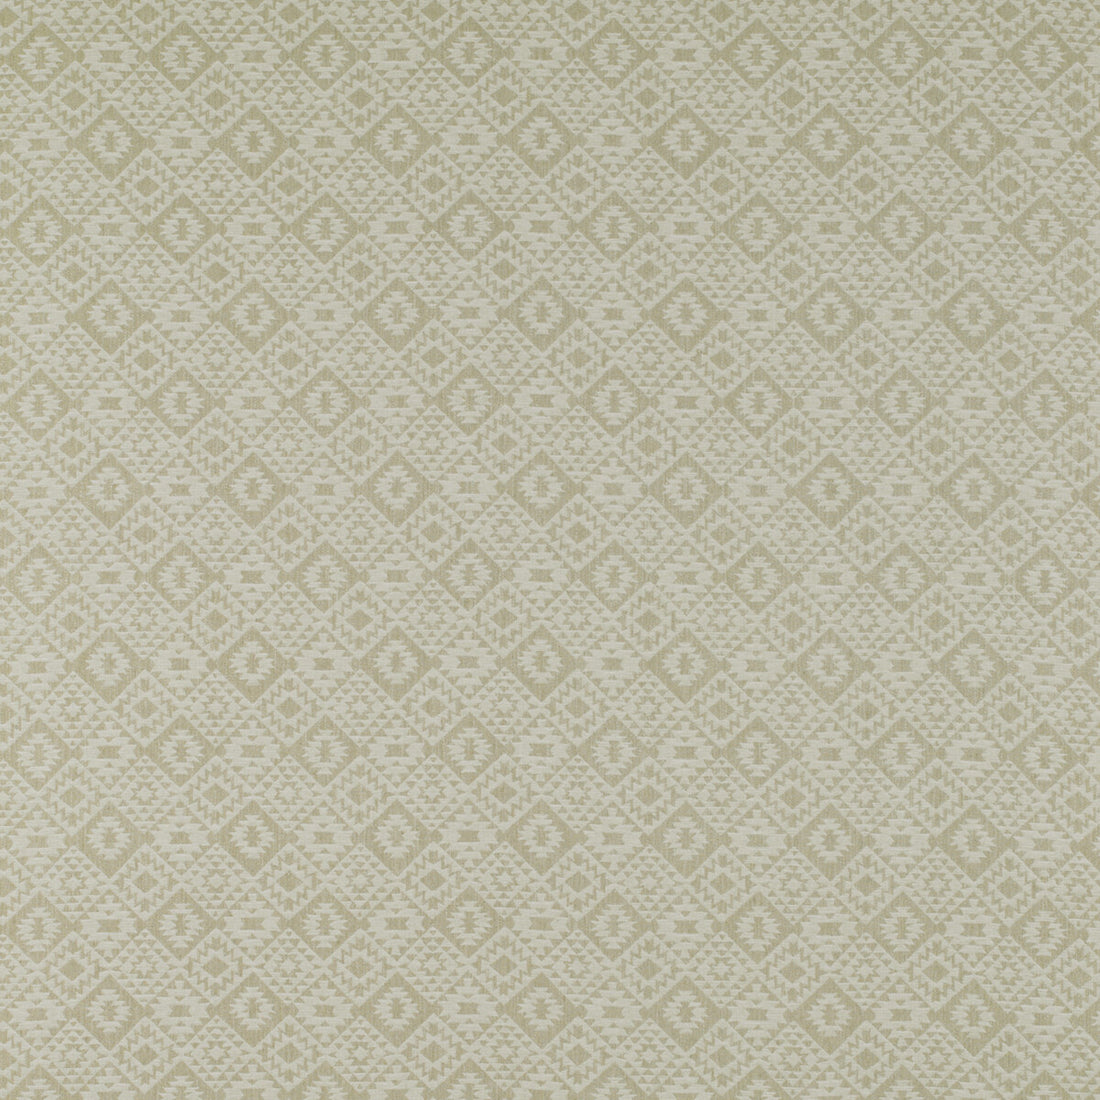 Lecco fabric in blanco color - pattern GDT5323.003.0 - by Gaston y Daniela in the Tierras collection